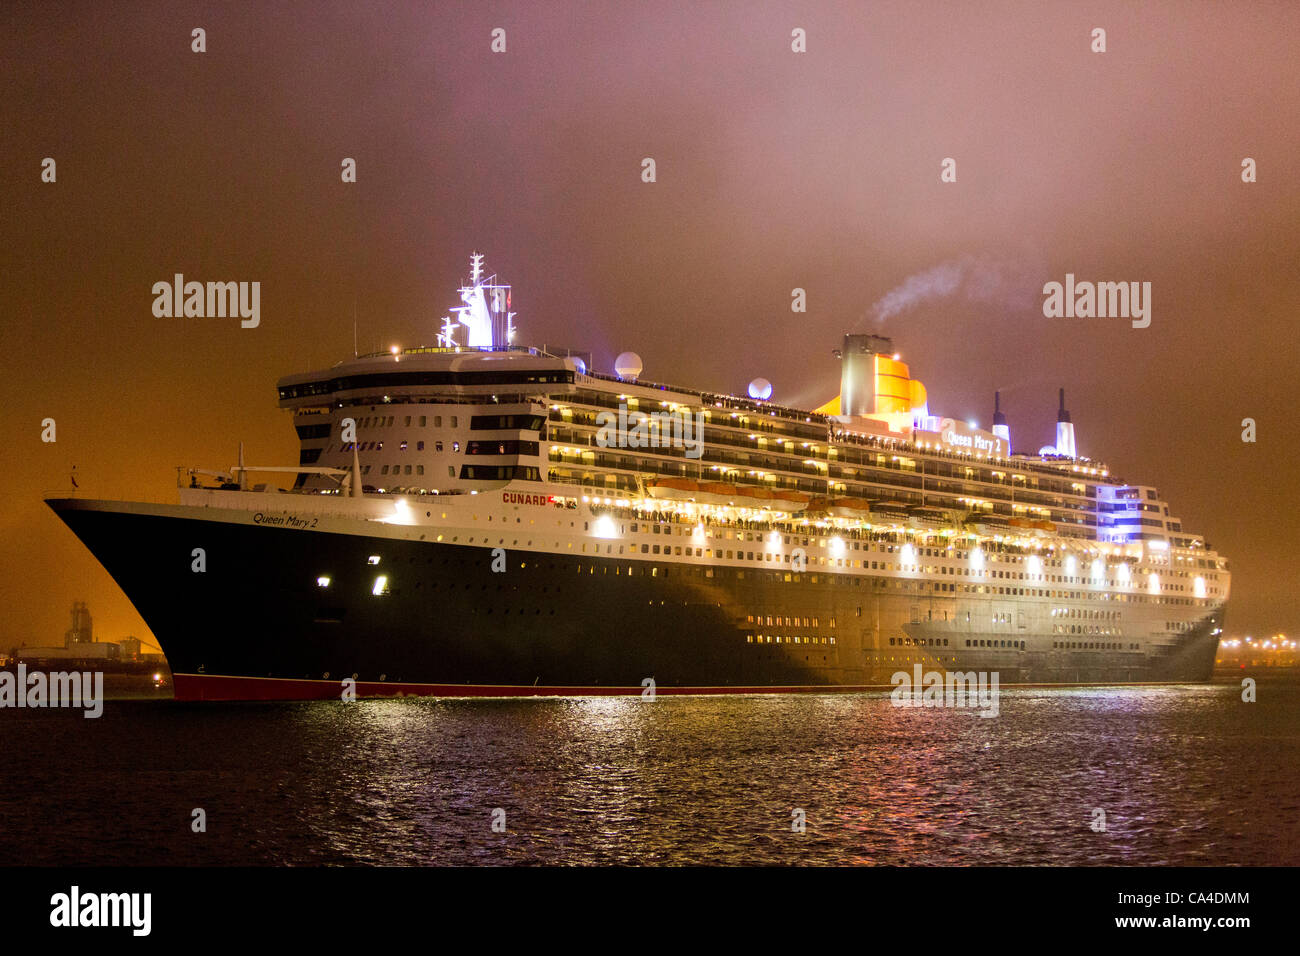 SOUTHAMPTON, UK, 5th June 2012. The Queen Mary 2 departs from Southampton dock as part of the 'Three Queens' event during celebrations for Queen Elizabeth II's Diamond Jubilee. Stock Photo